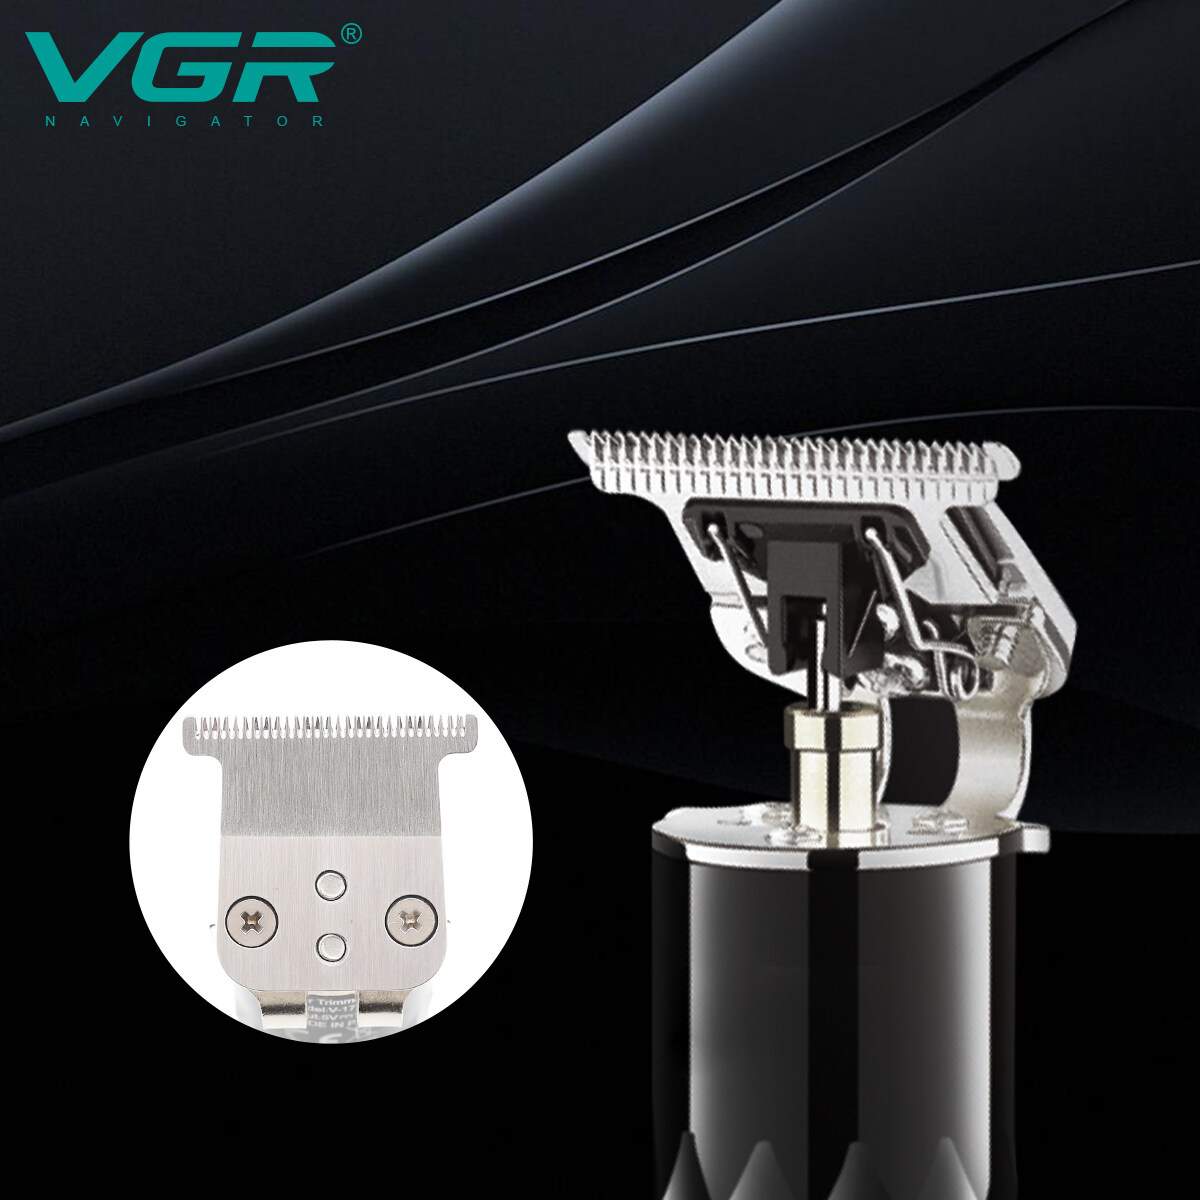 china electric hair trimmer, china hair trimmer factory, china hair trimmer set, china hair trimmer suppliers, china rechargeable hair trimmer